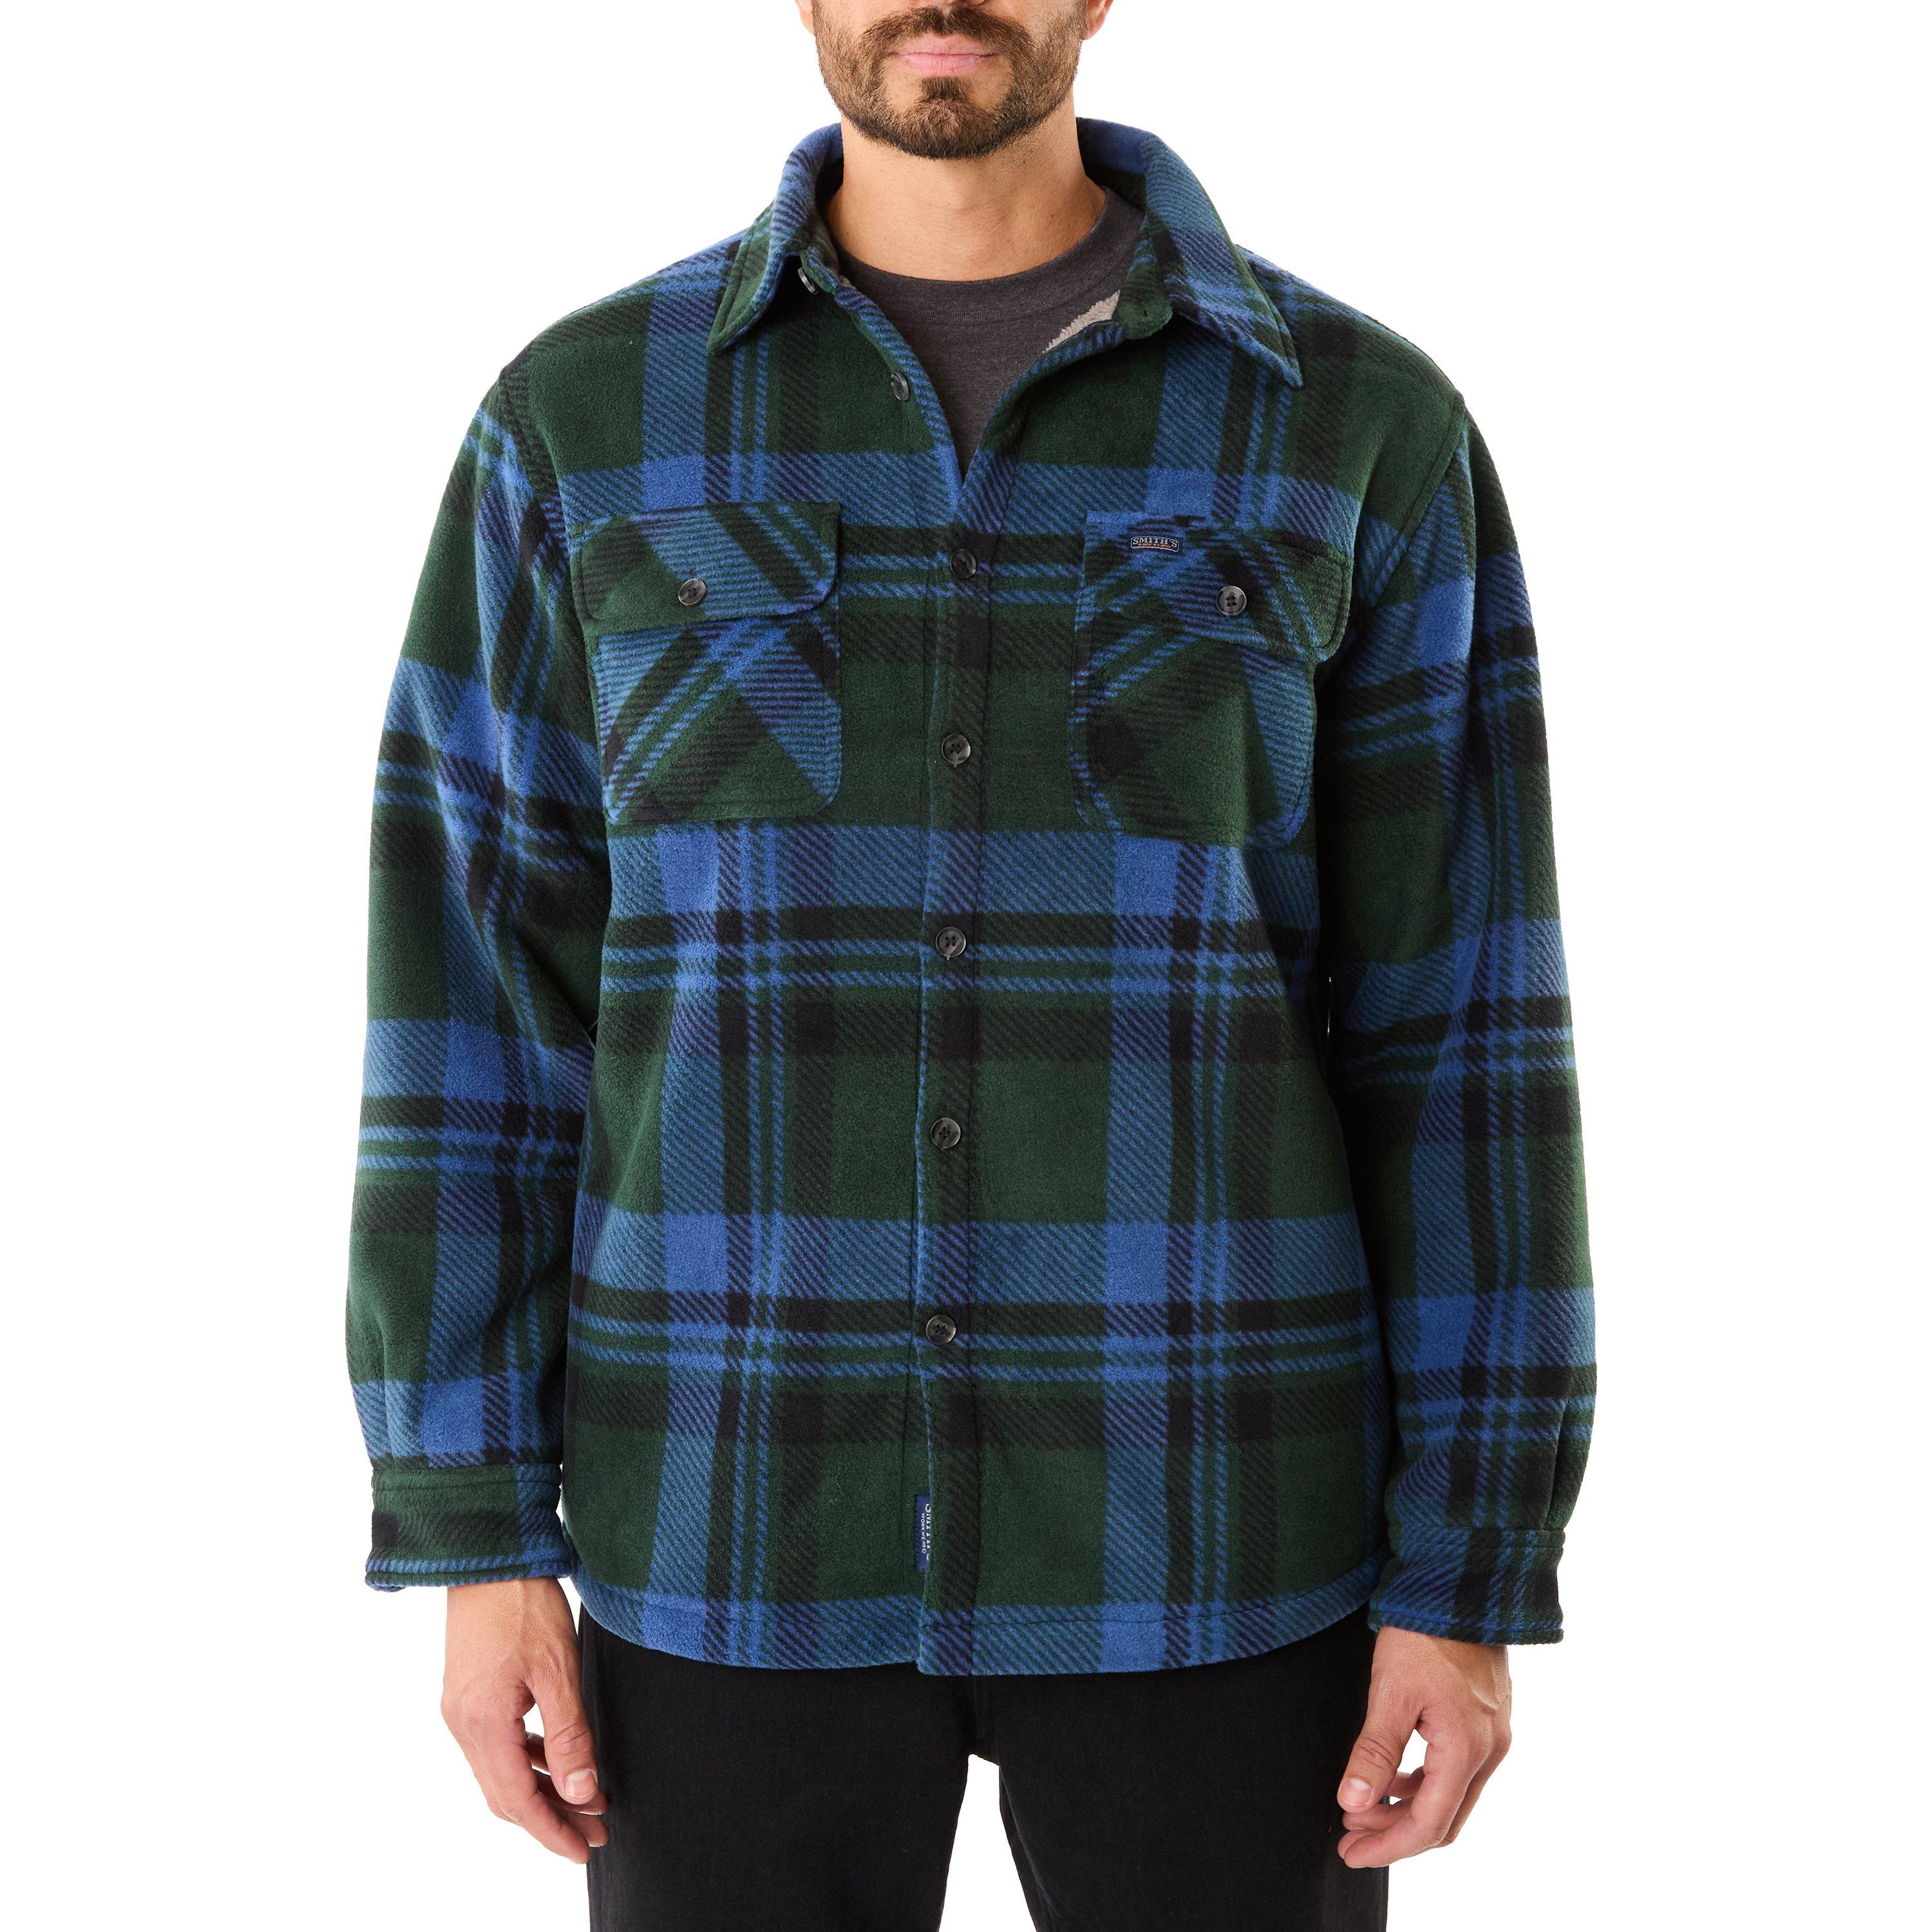 Men's THERMAL LINED Brushed Plaid FLANNEL SHIRT JACKET Insulated Body &  Sleeves